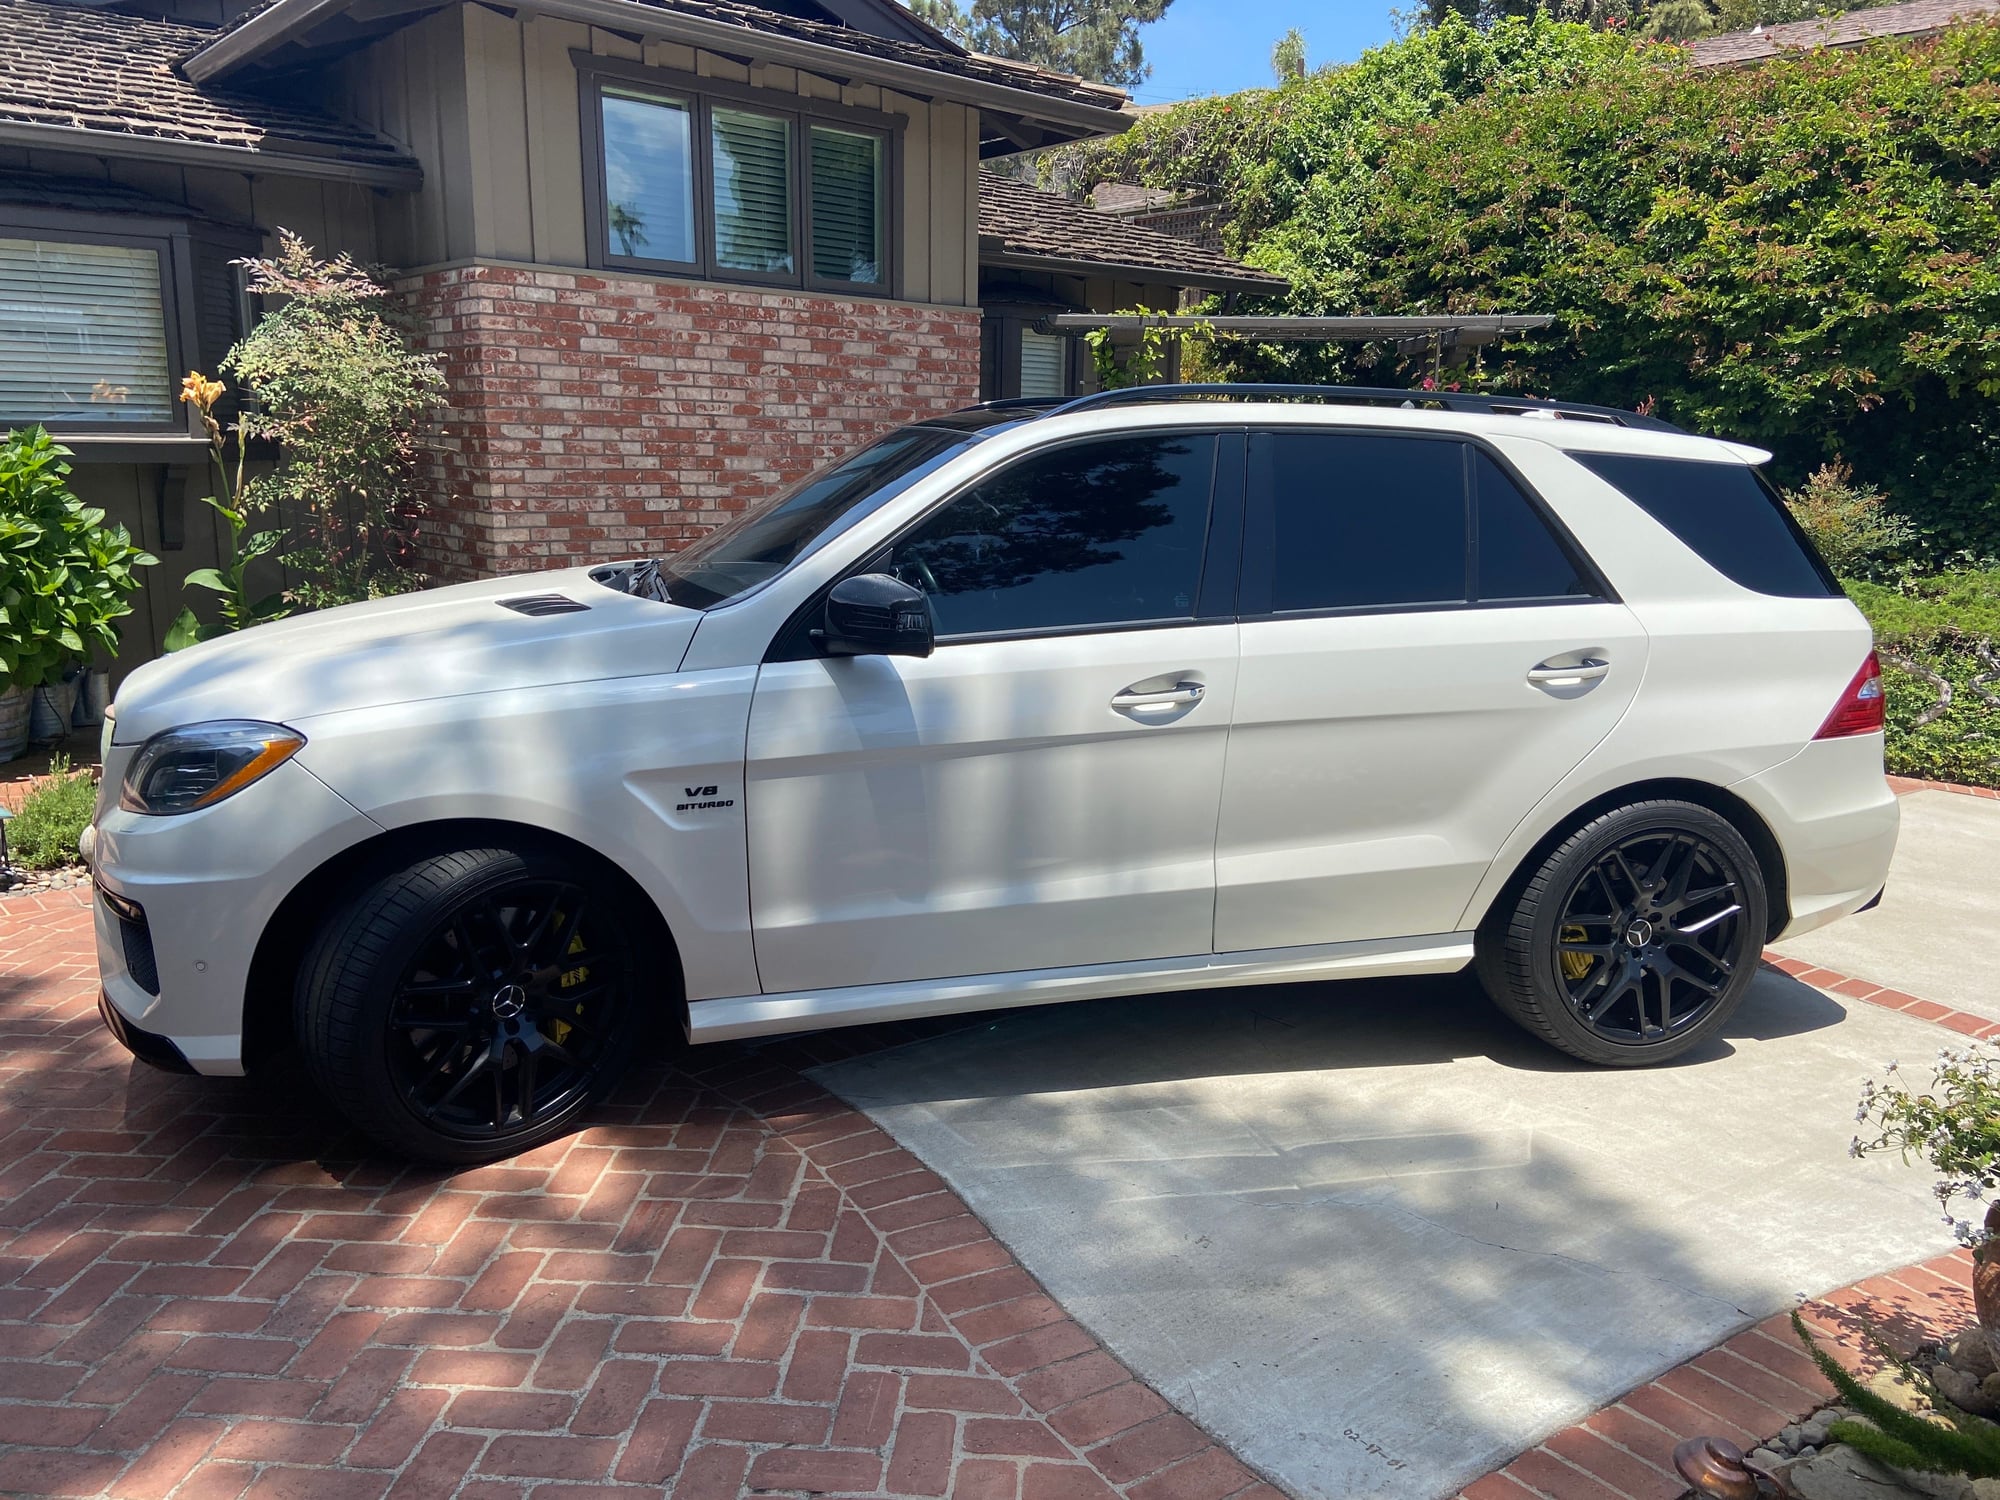 2013 Mercedes-Benz ML63 AMG - 2013 ML63 AMG Highly Optioned - Used - VIN WAUKF78E08A116737 - 76,800 Miles - 8 cyl - AWD - Automatic - SUV - White - Denver, CO 80207, United States